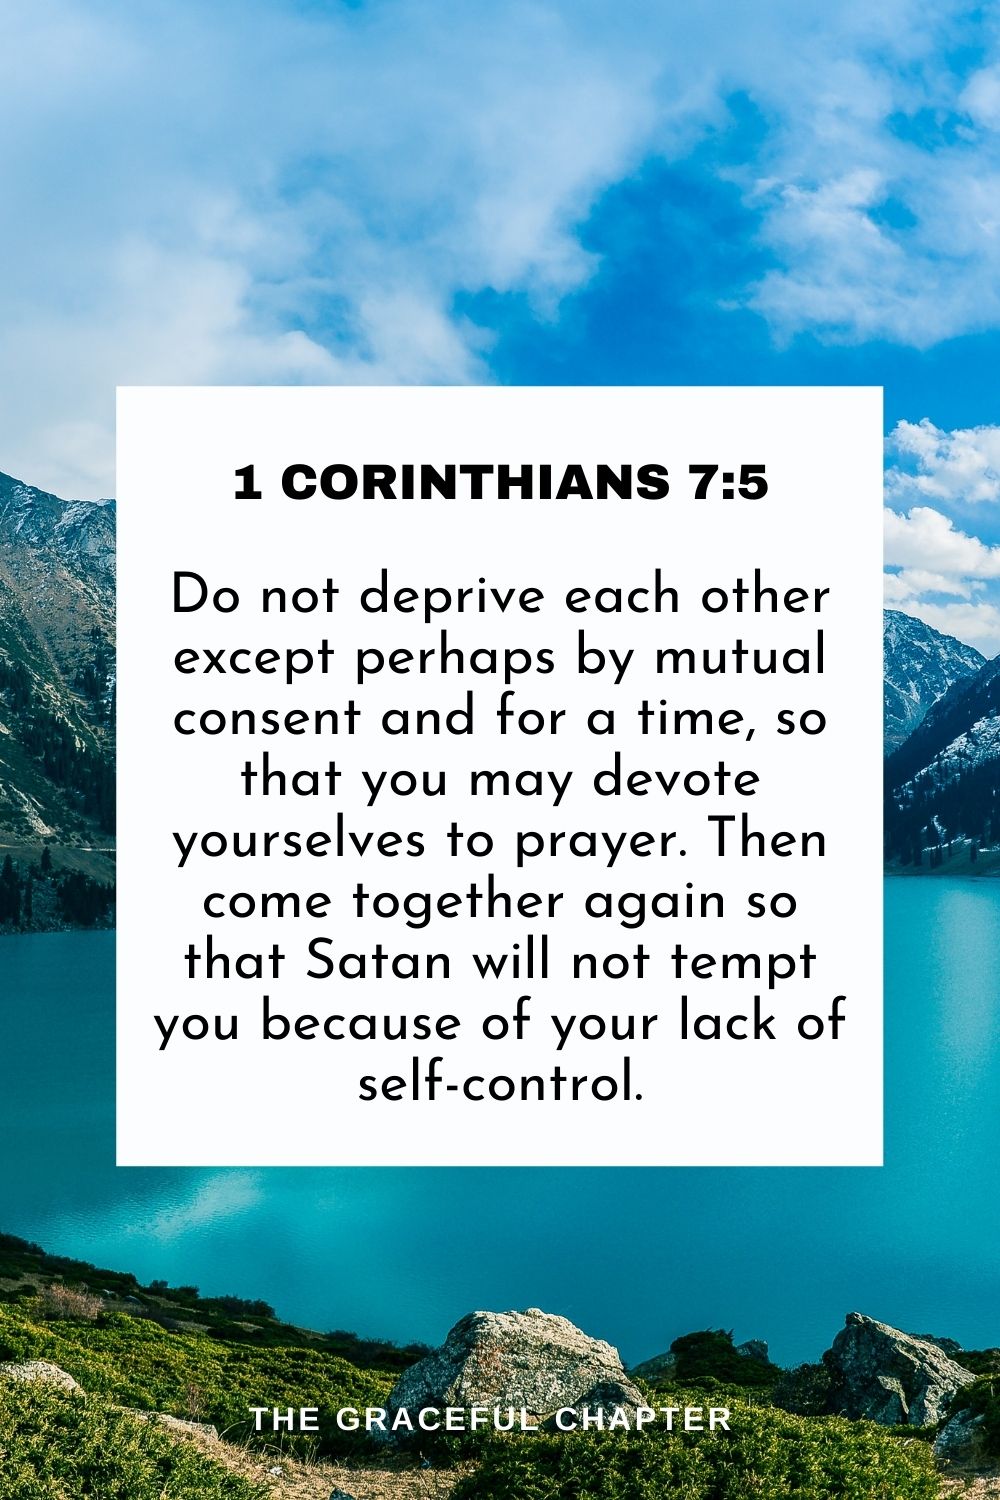 Do not deprive each other except perhaps by mutual consent and for a time, so that you may devote yourselves to prayer. Then come together again so that Satan will not tempt you because of your lack of self-control. 1 Corinthians 7:5